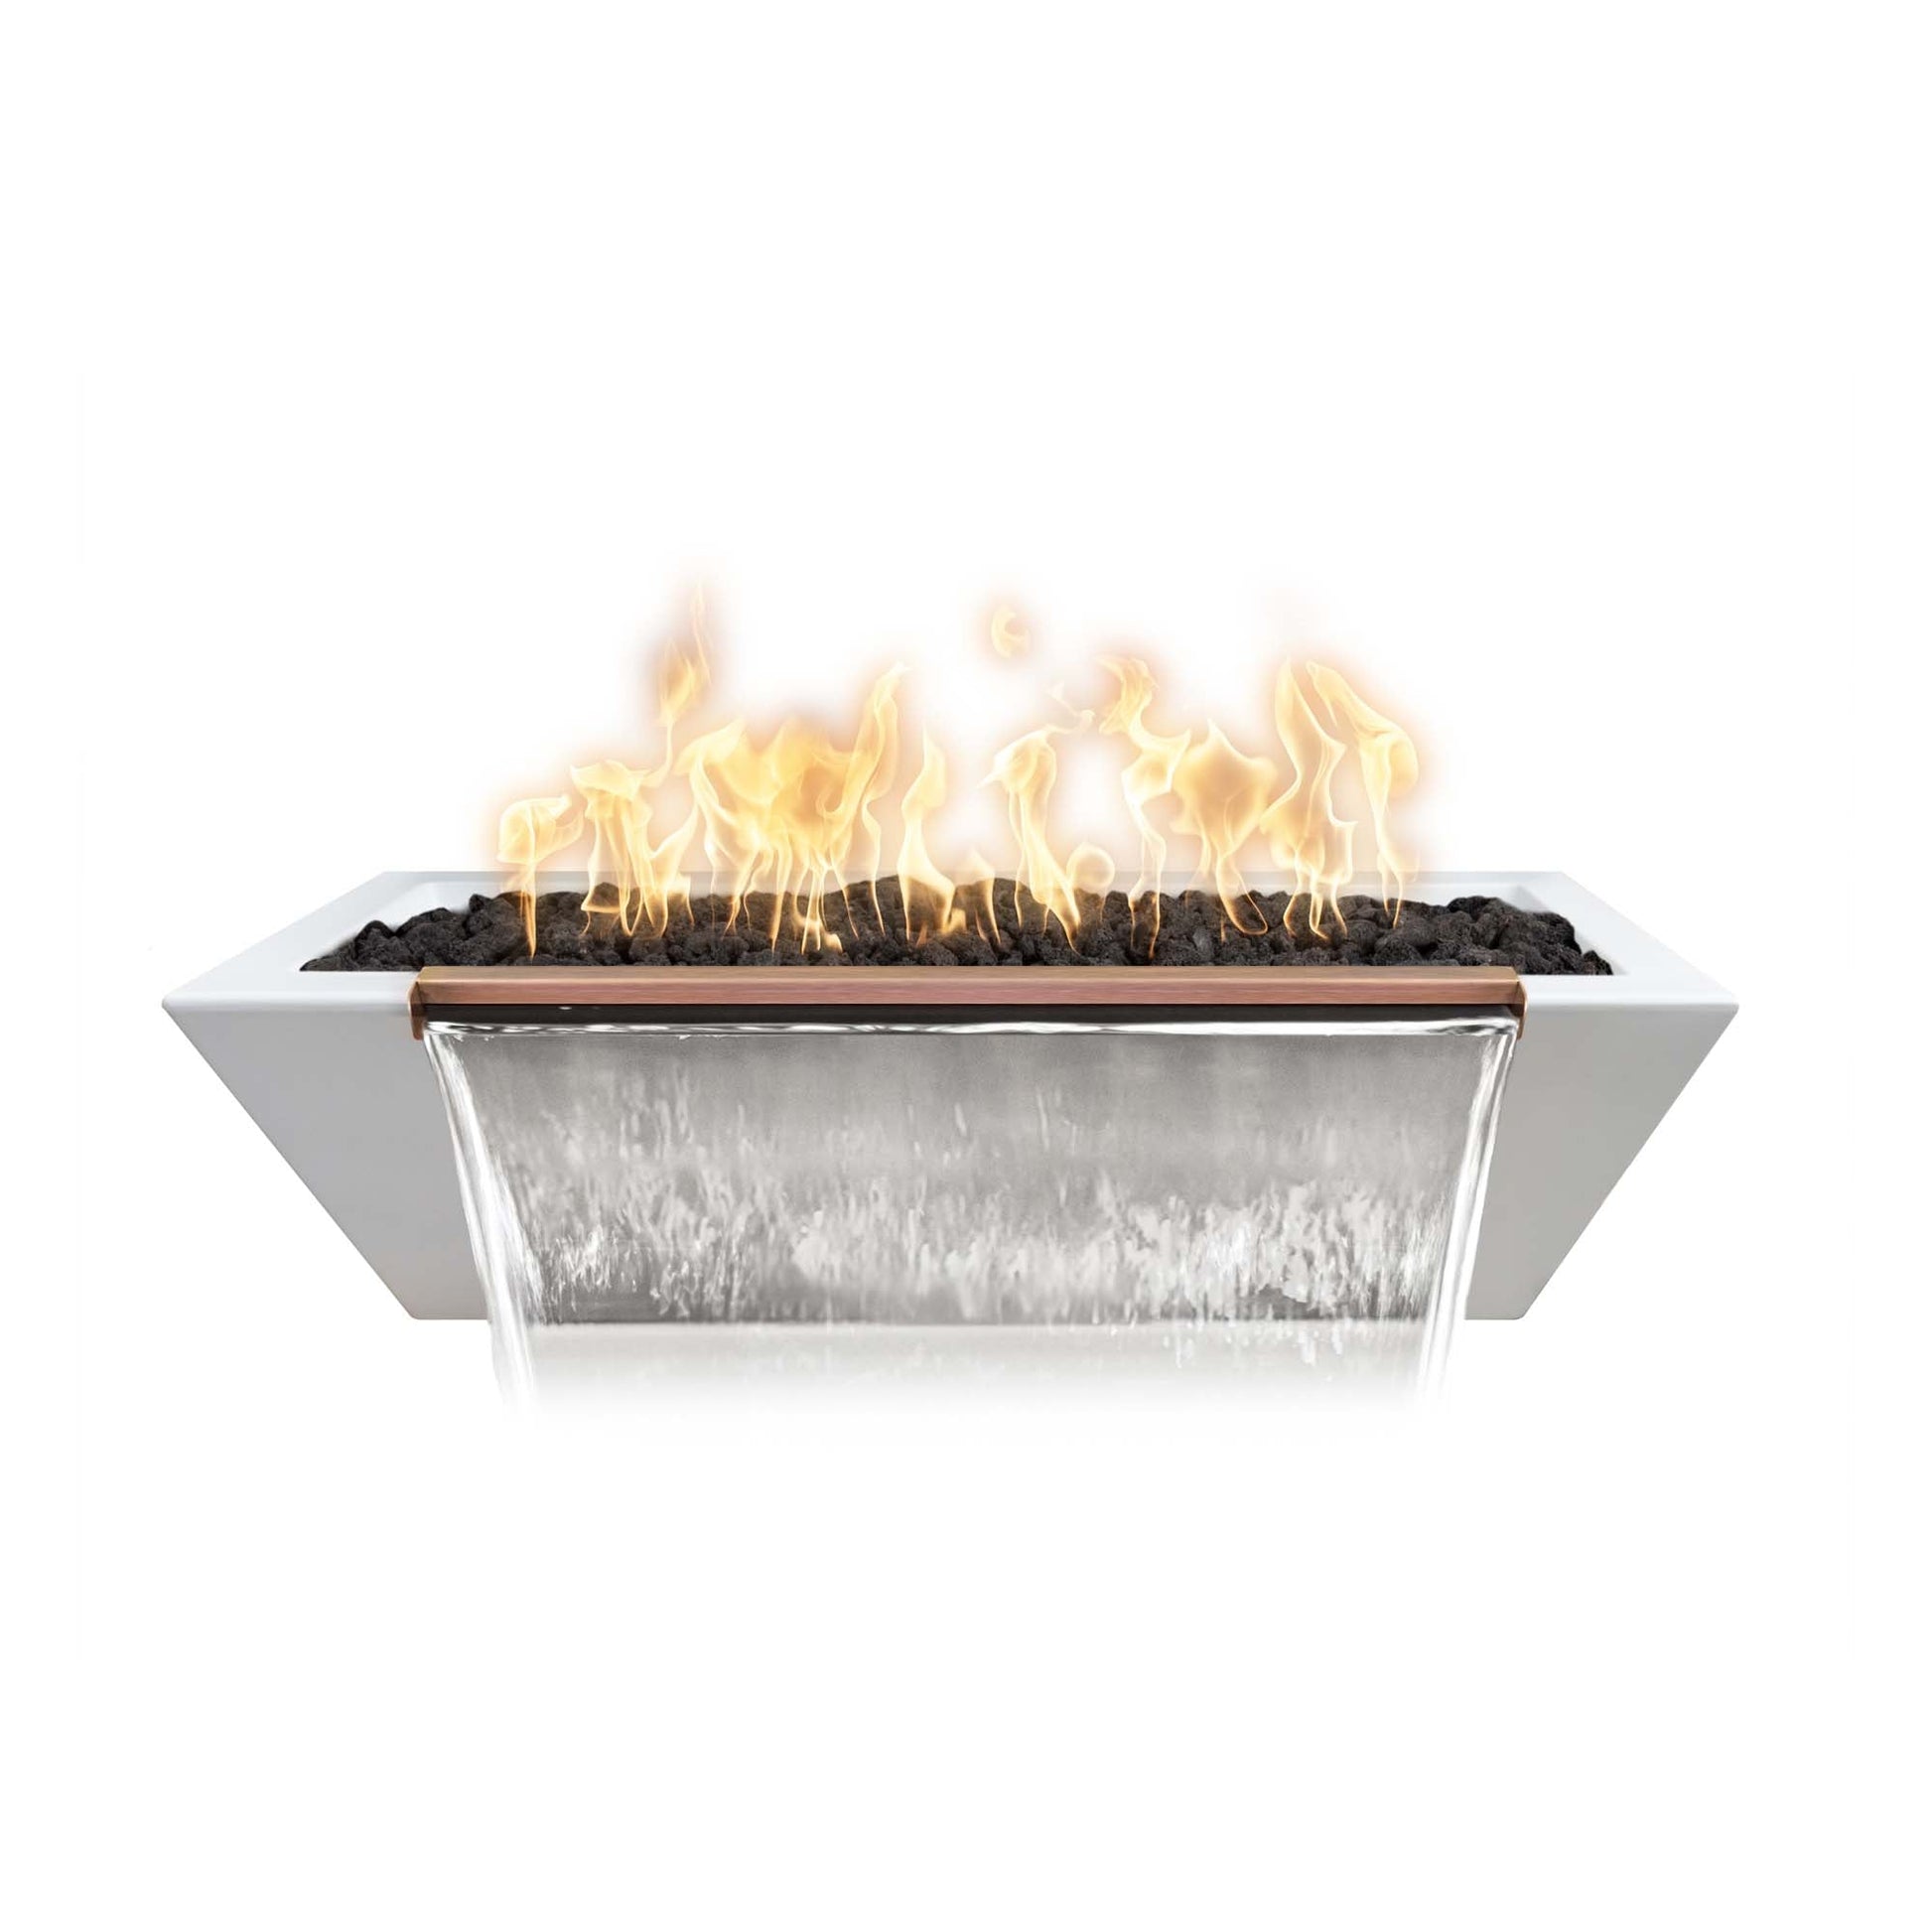 The Outdoor Plus Linear Maya 60" Brown GFRC Concrete Natural Gas Fire & Water Bowl with 12V Electronic Ignition